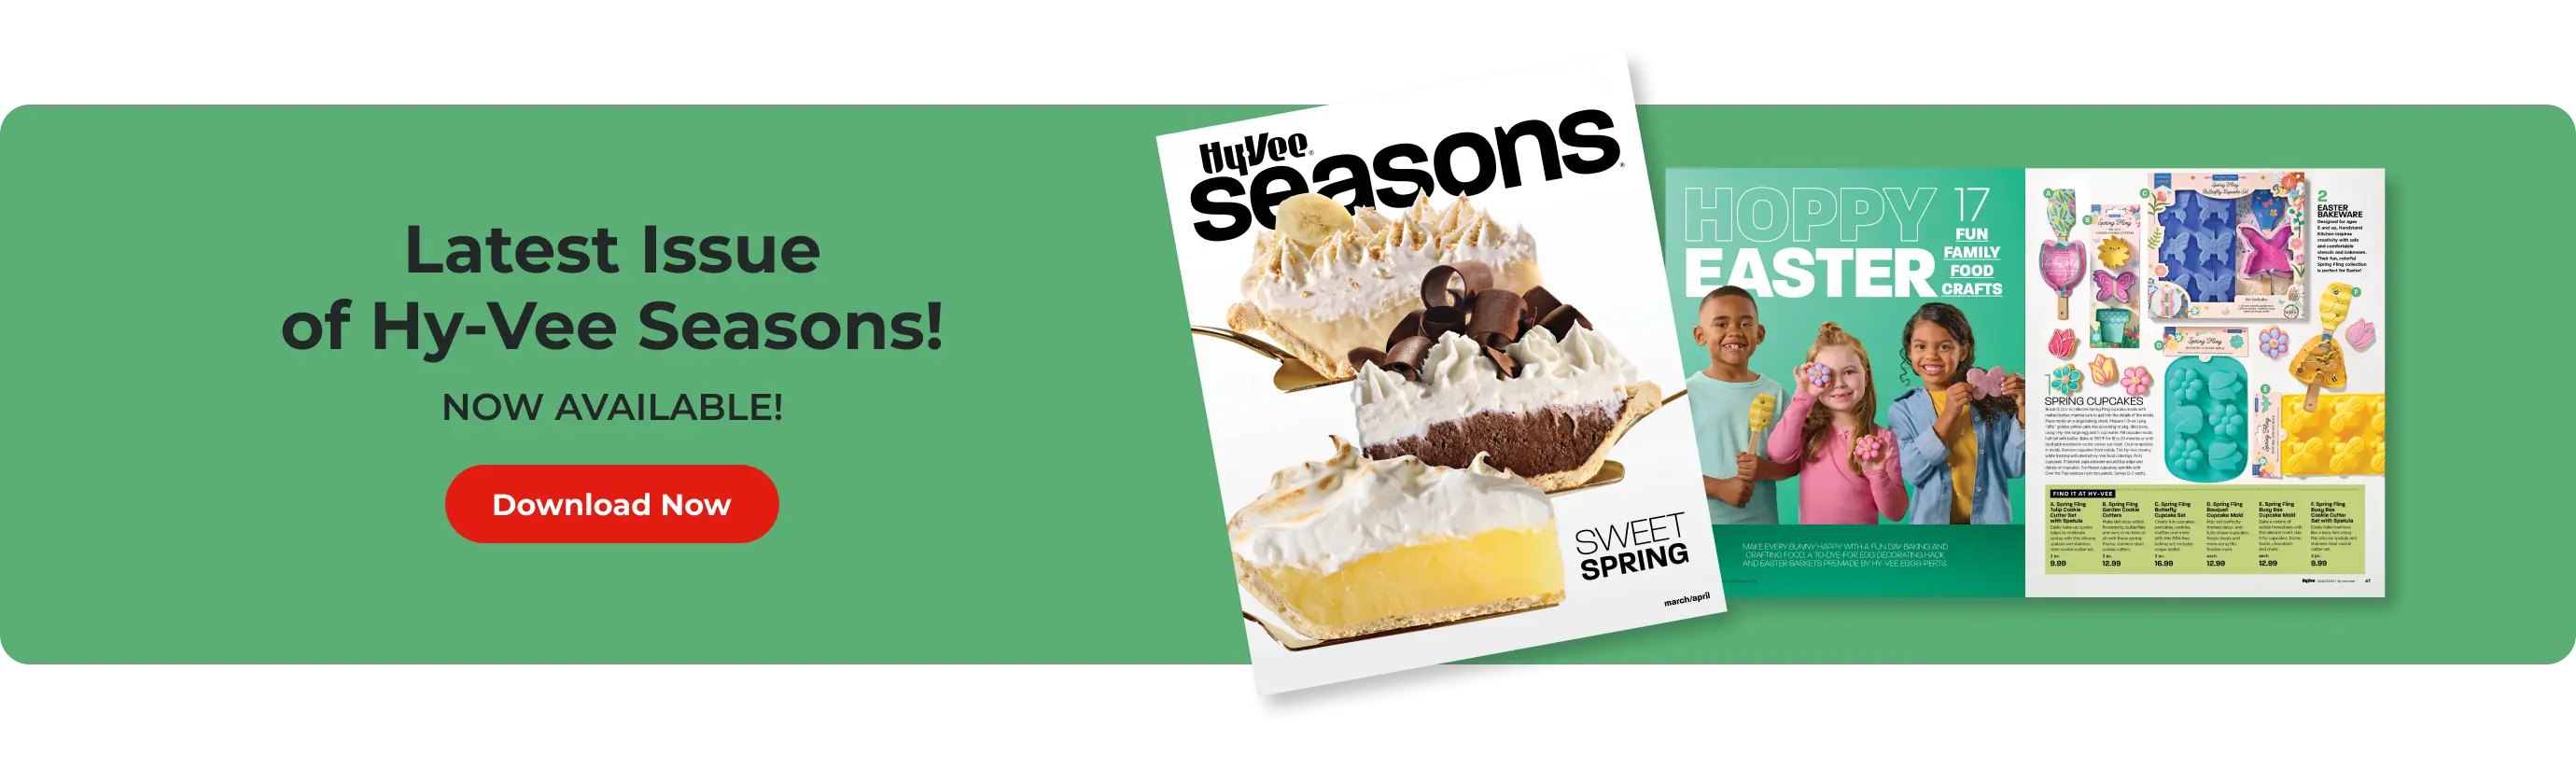 Clinton Pkwy Hy-Vee on X: Kick off your season right with 20% off